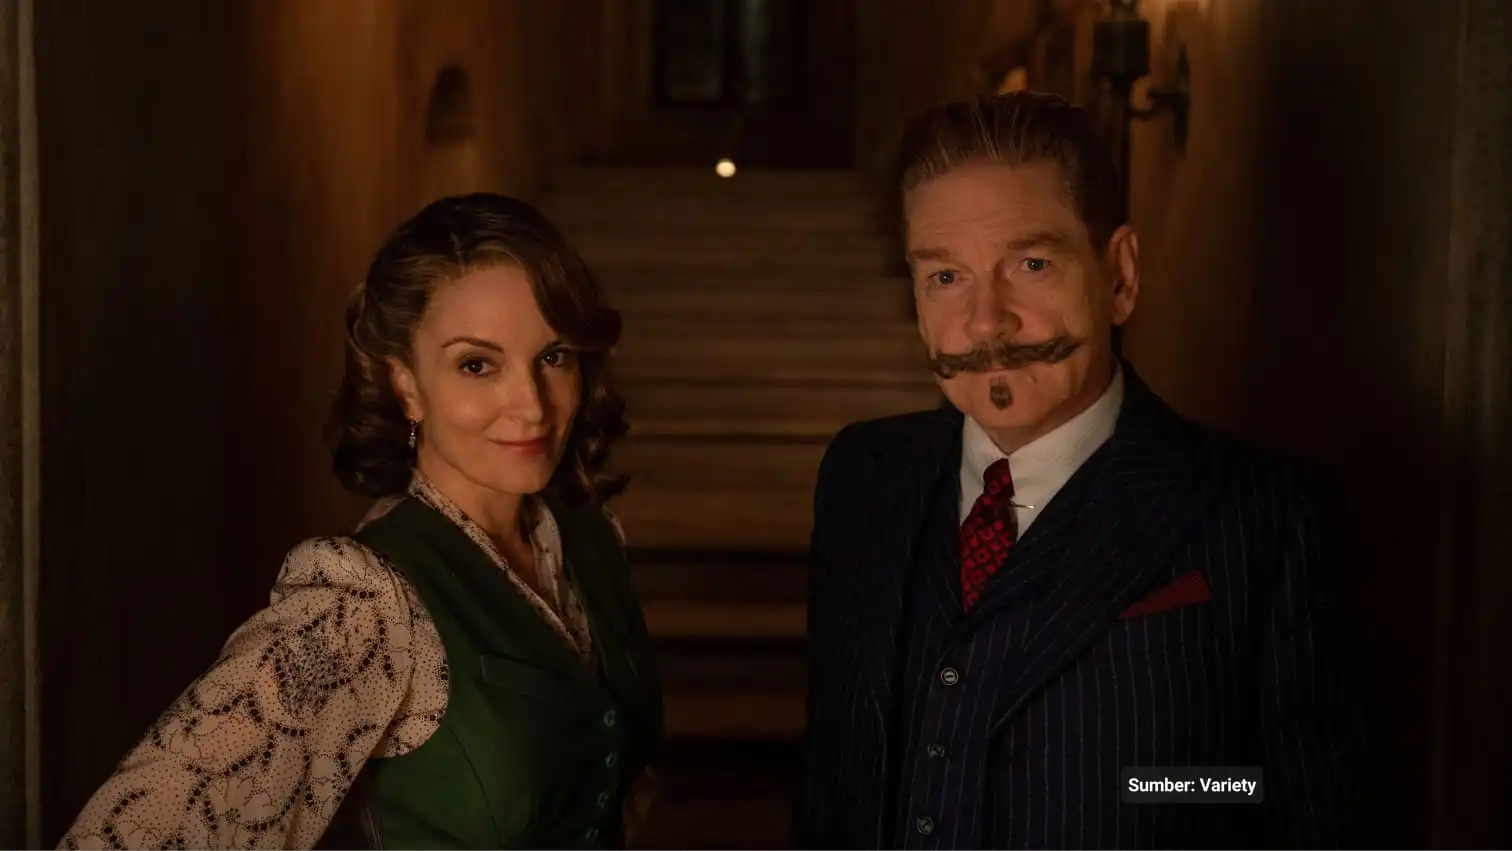 A Haunting in Venice: The Poirot Film Franchise Finds Its Footing in This Spooky Murder Mystery